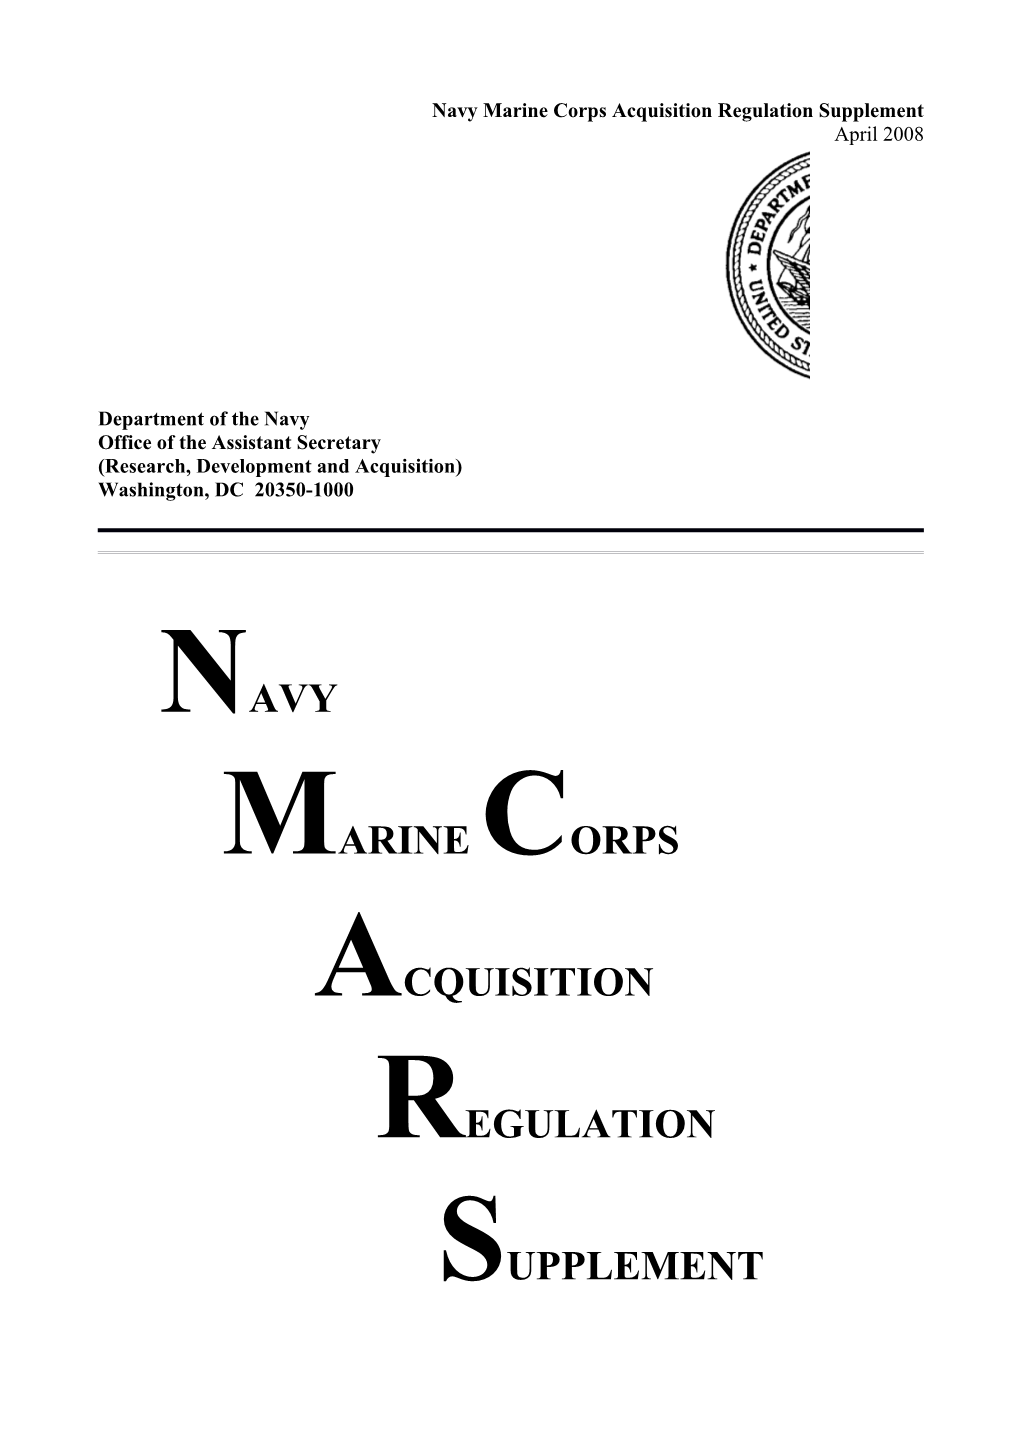 Change 08-12 to the Navy Marine Corps Acquisition Regulation Supplement (NMCARS) (A. H